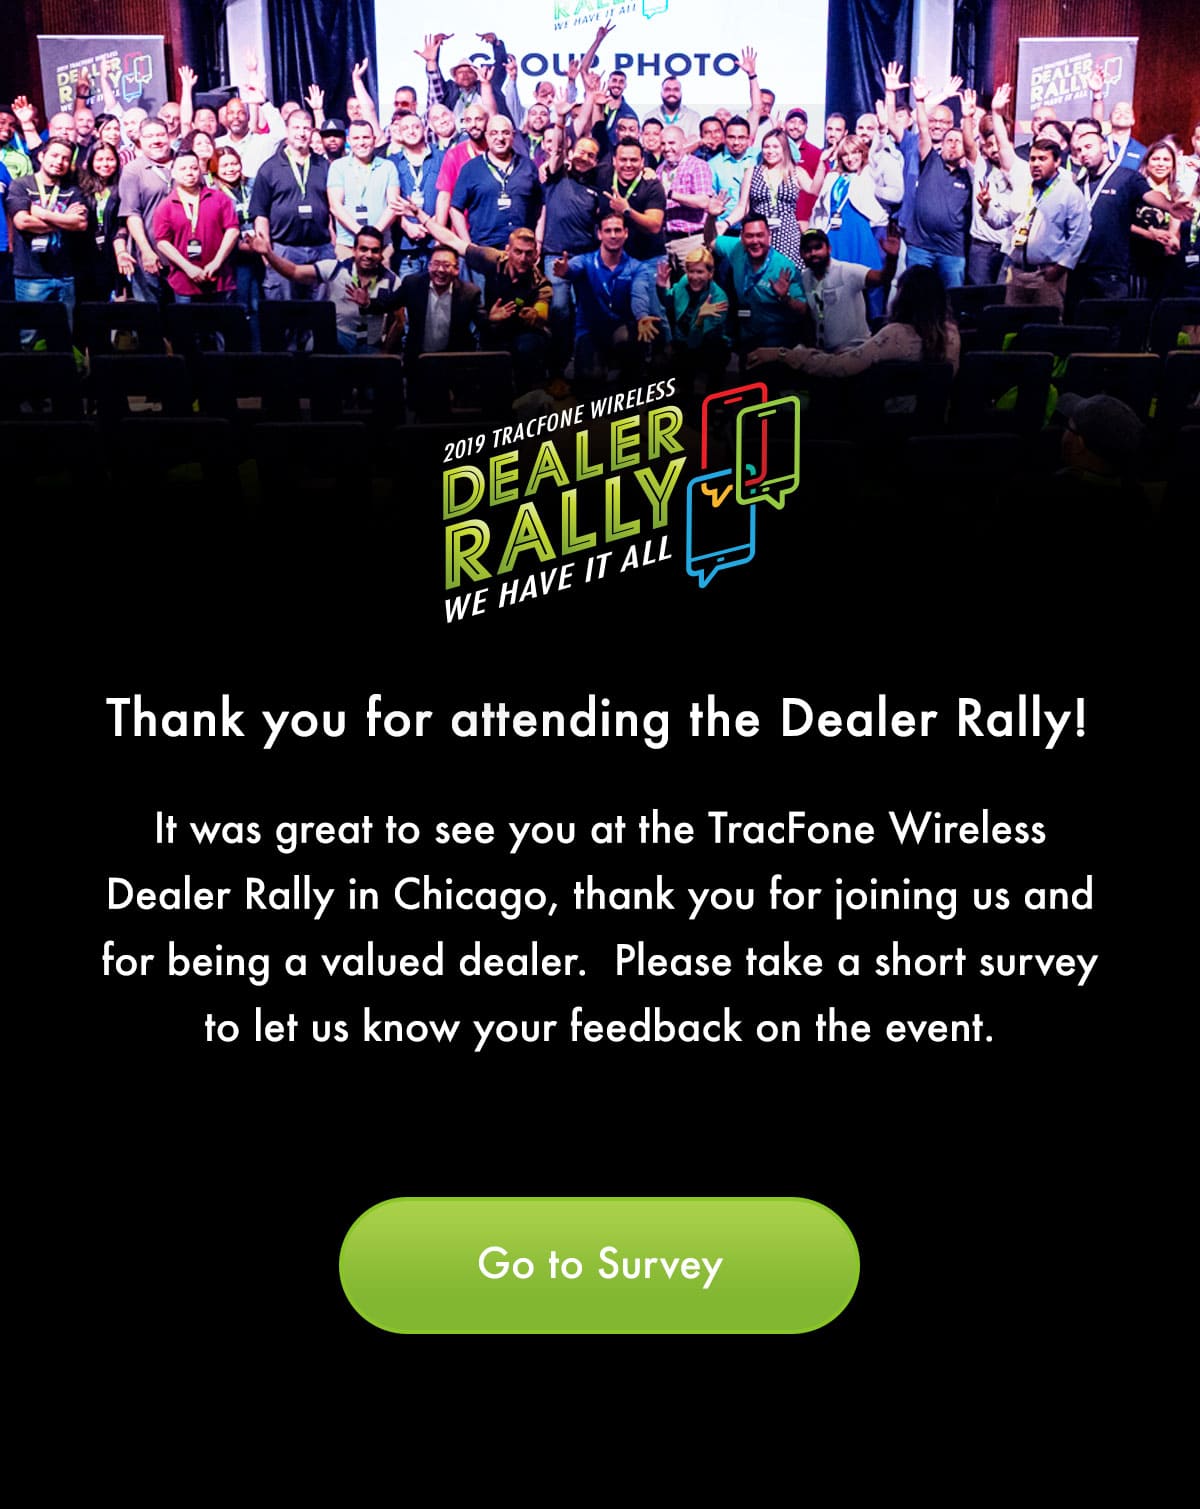 Thank you for joining us for the Dealer Rally in Anaheim!  Please take a moment to share your feedback about the event.